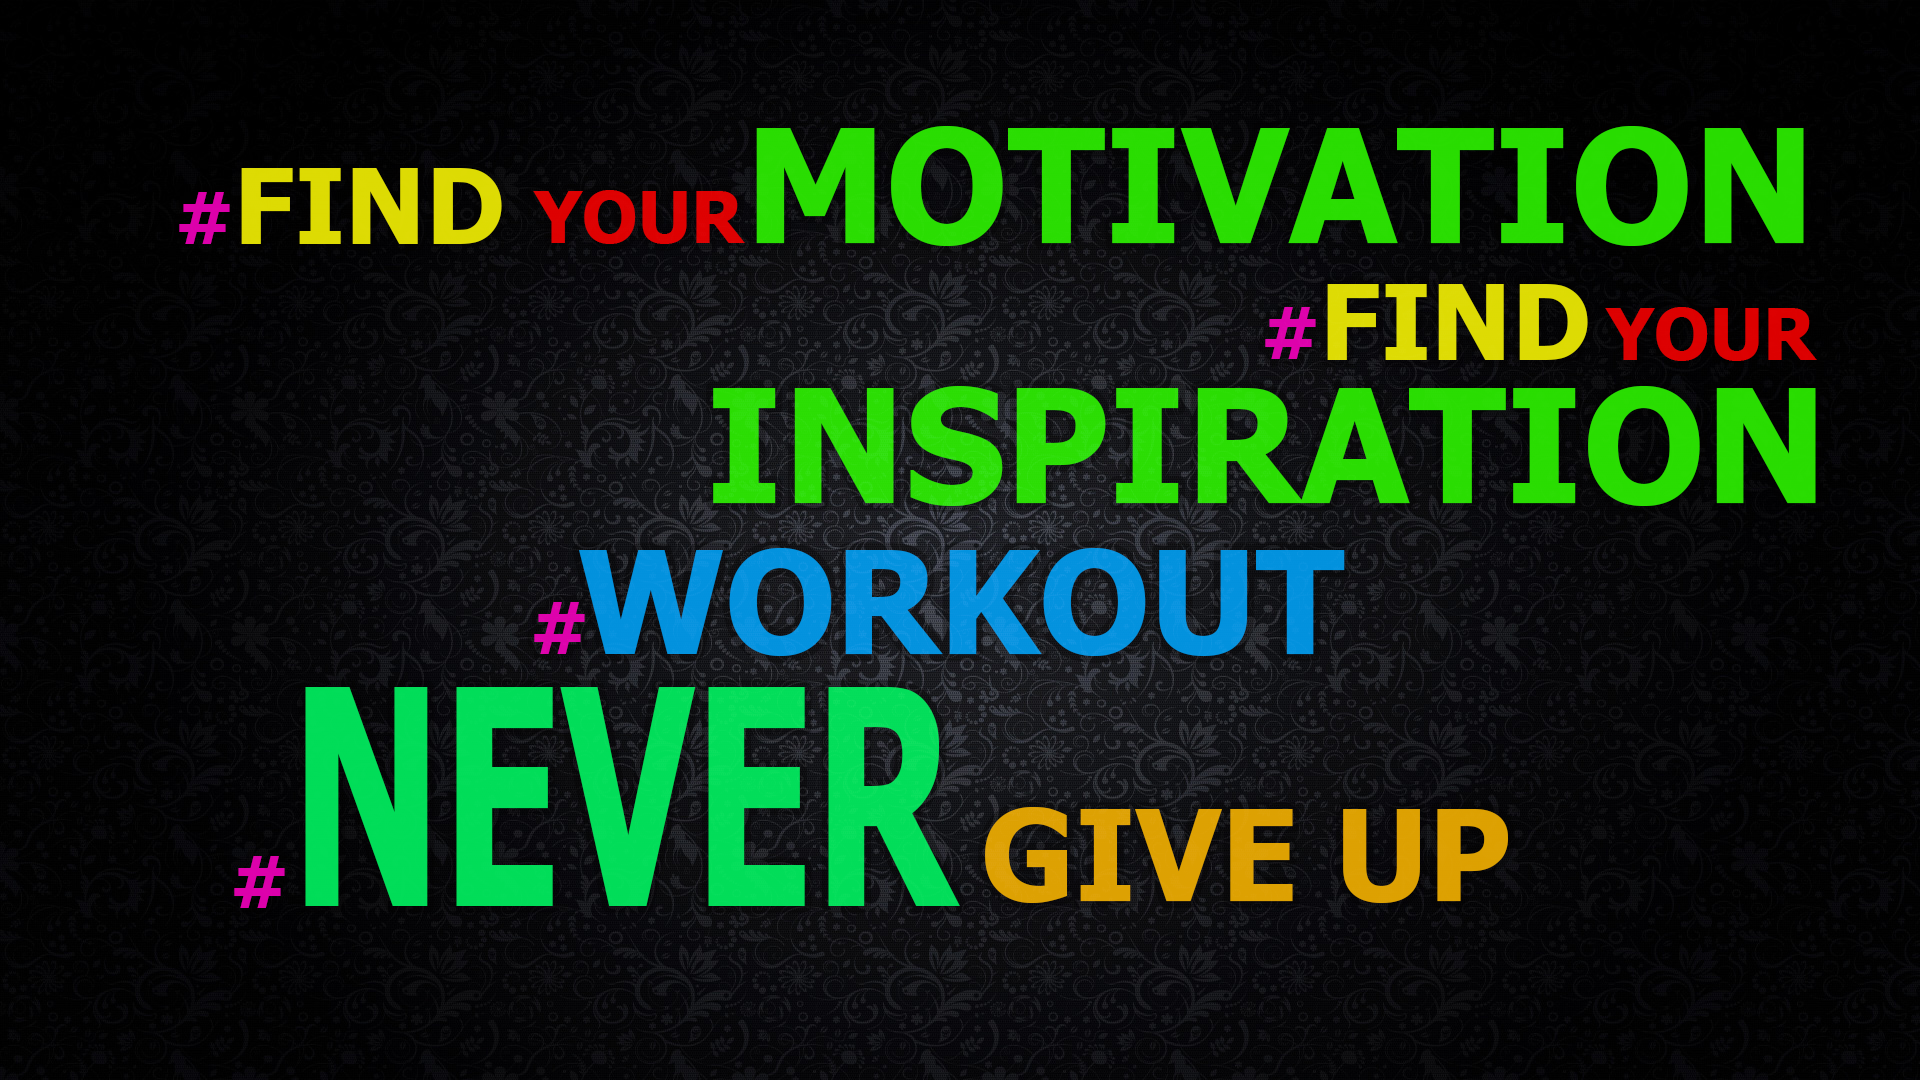 Simple, Wallpaper, Background, Android, iPhone, Motivation